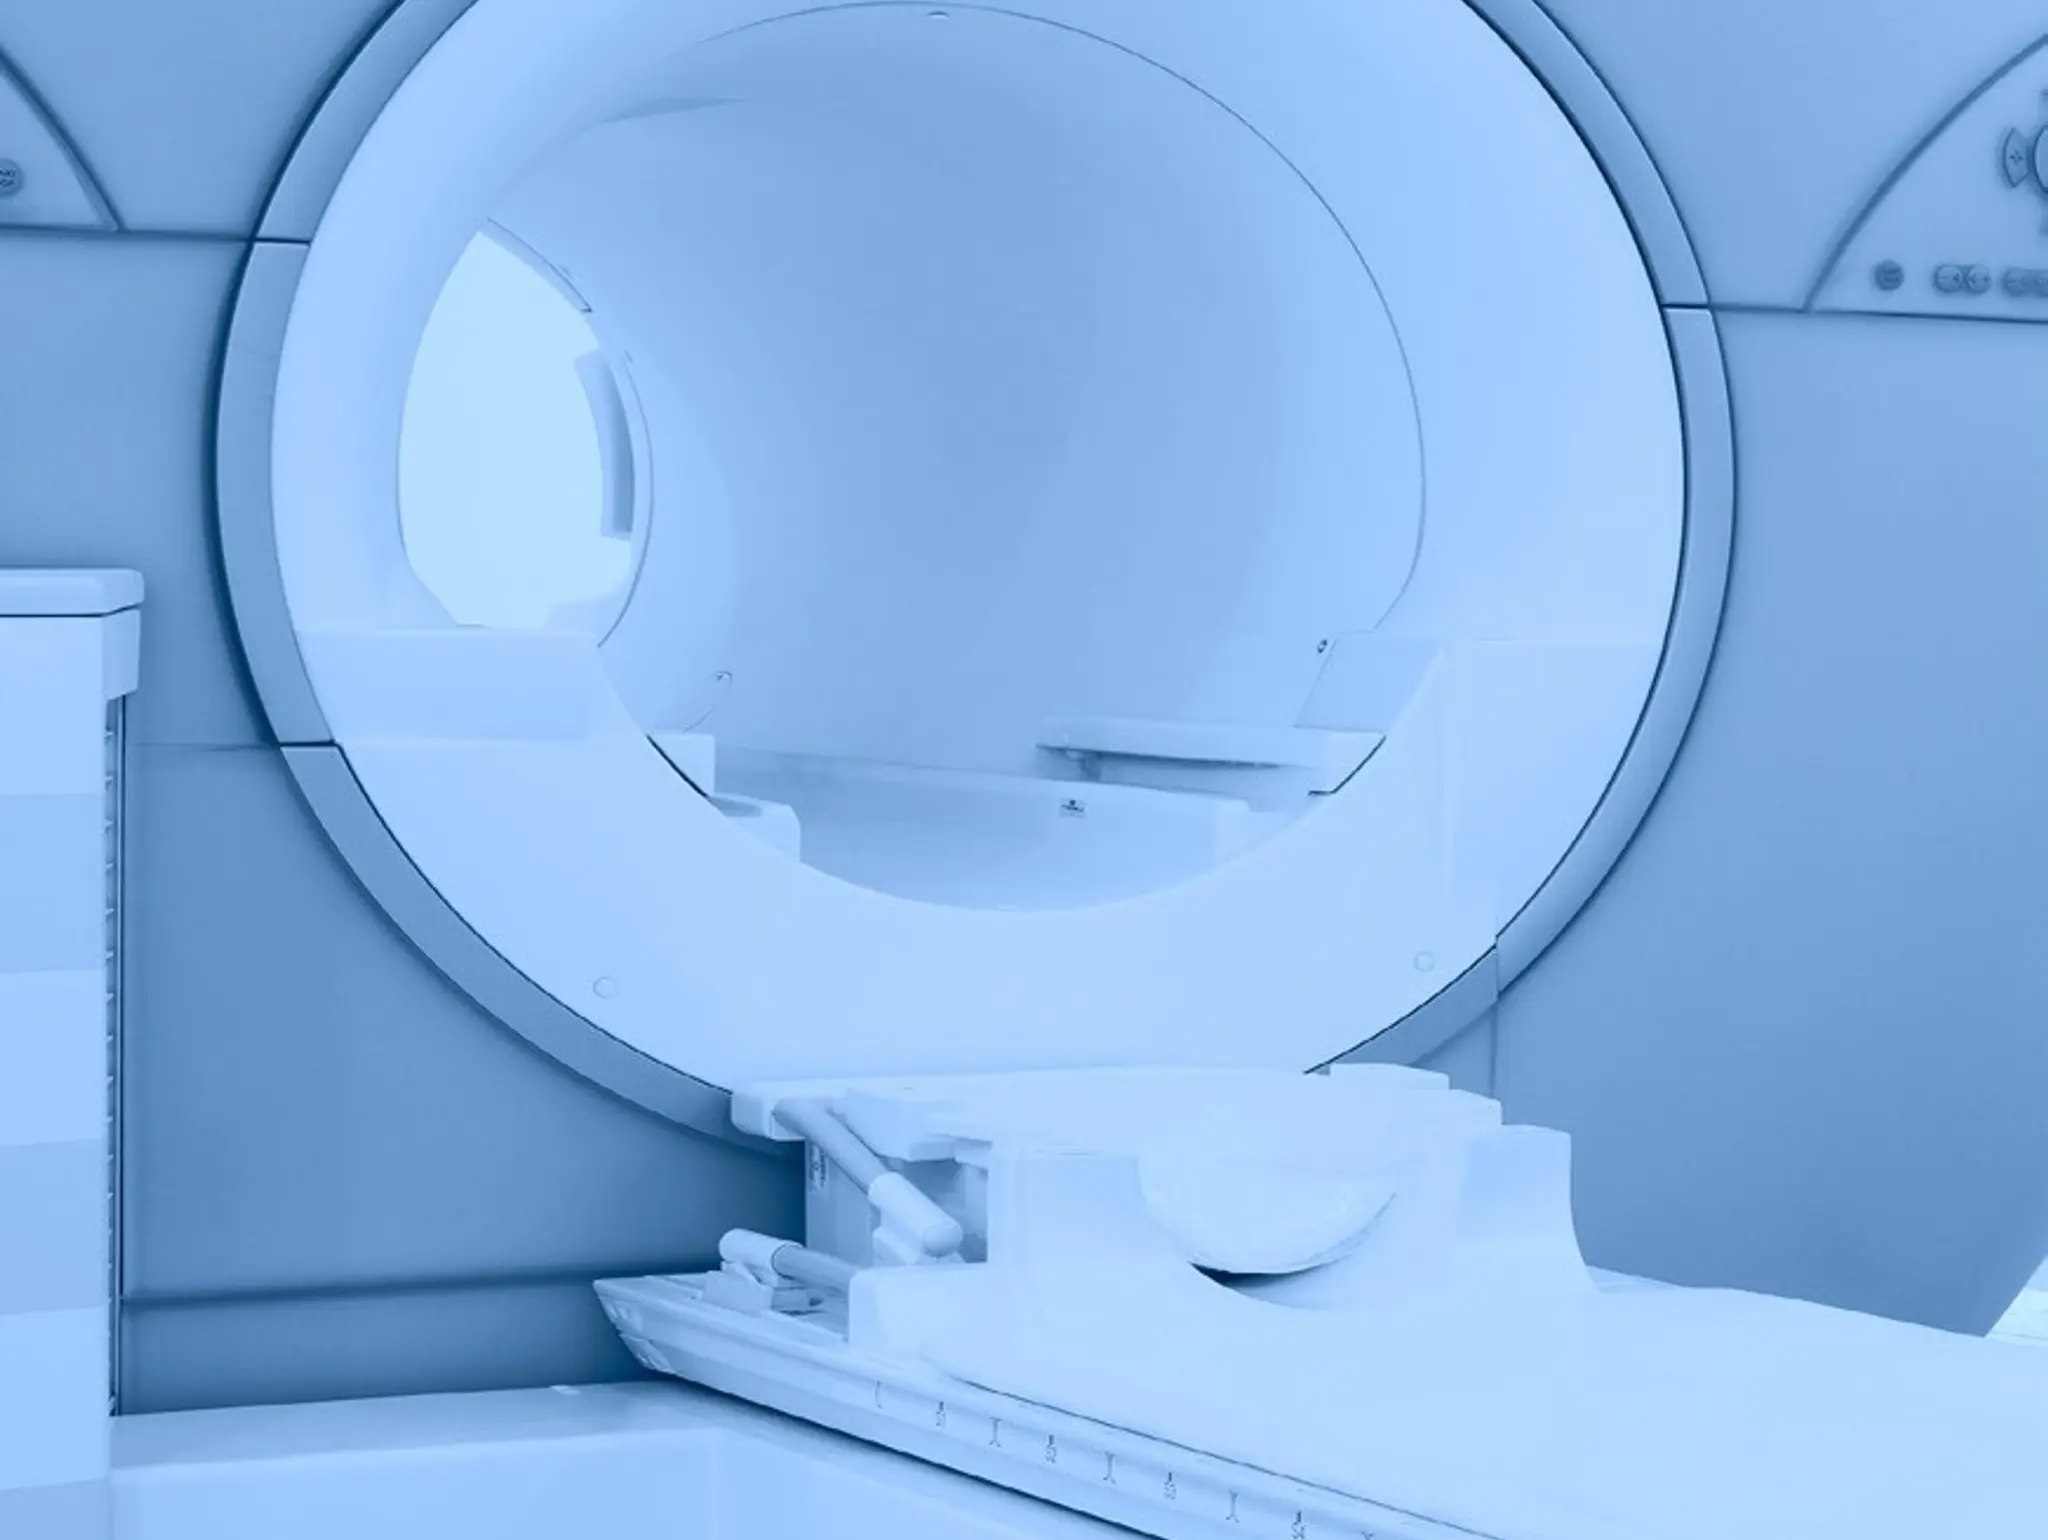 NICE publishes draft guidance surrounding the use of AI use in radiotherapy treatment planning